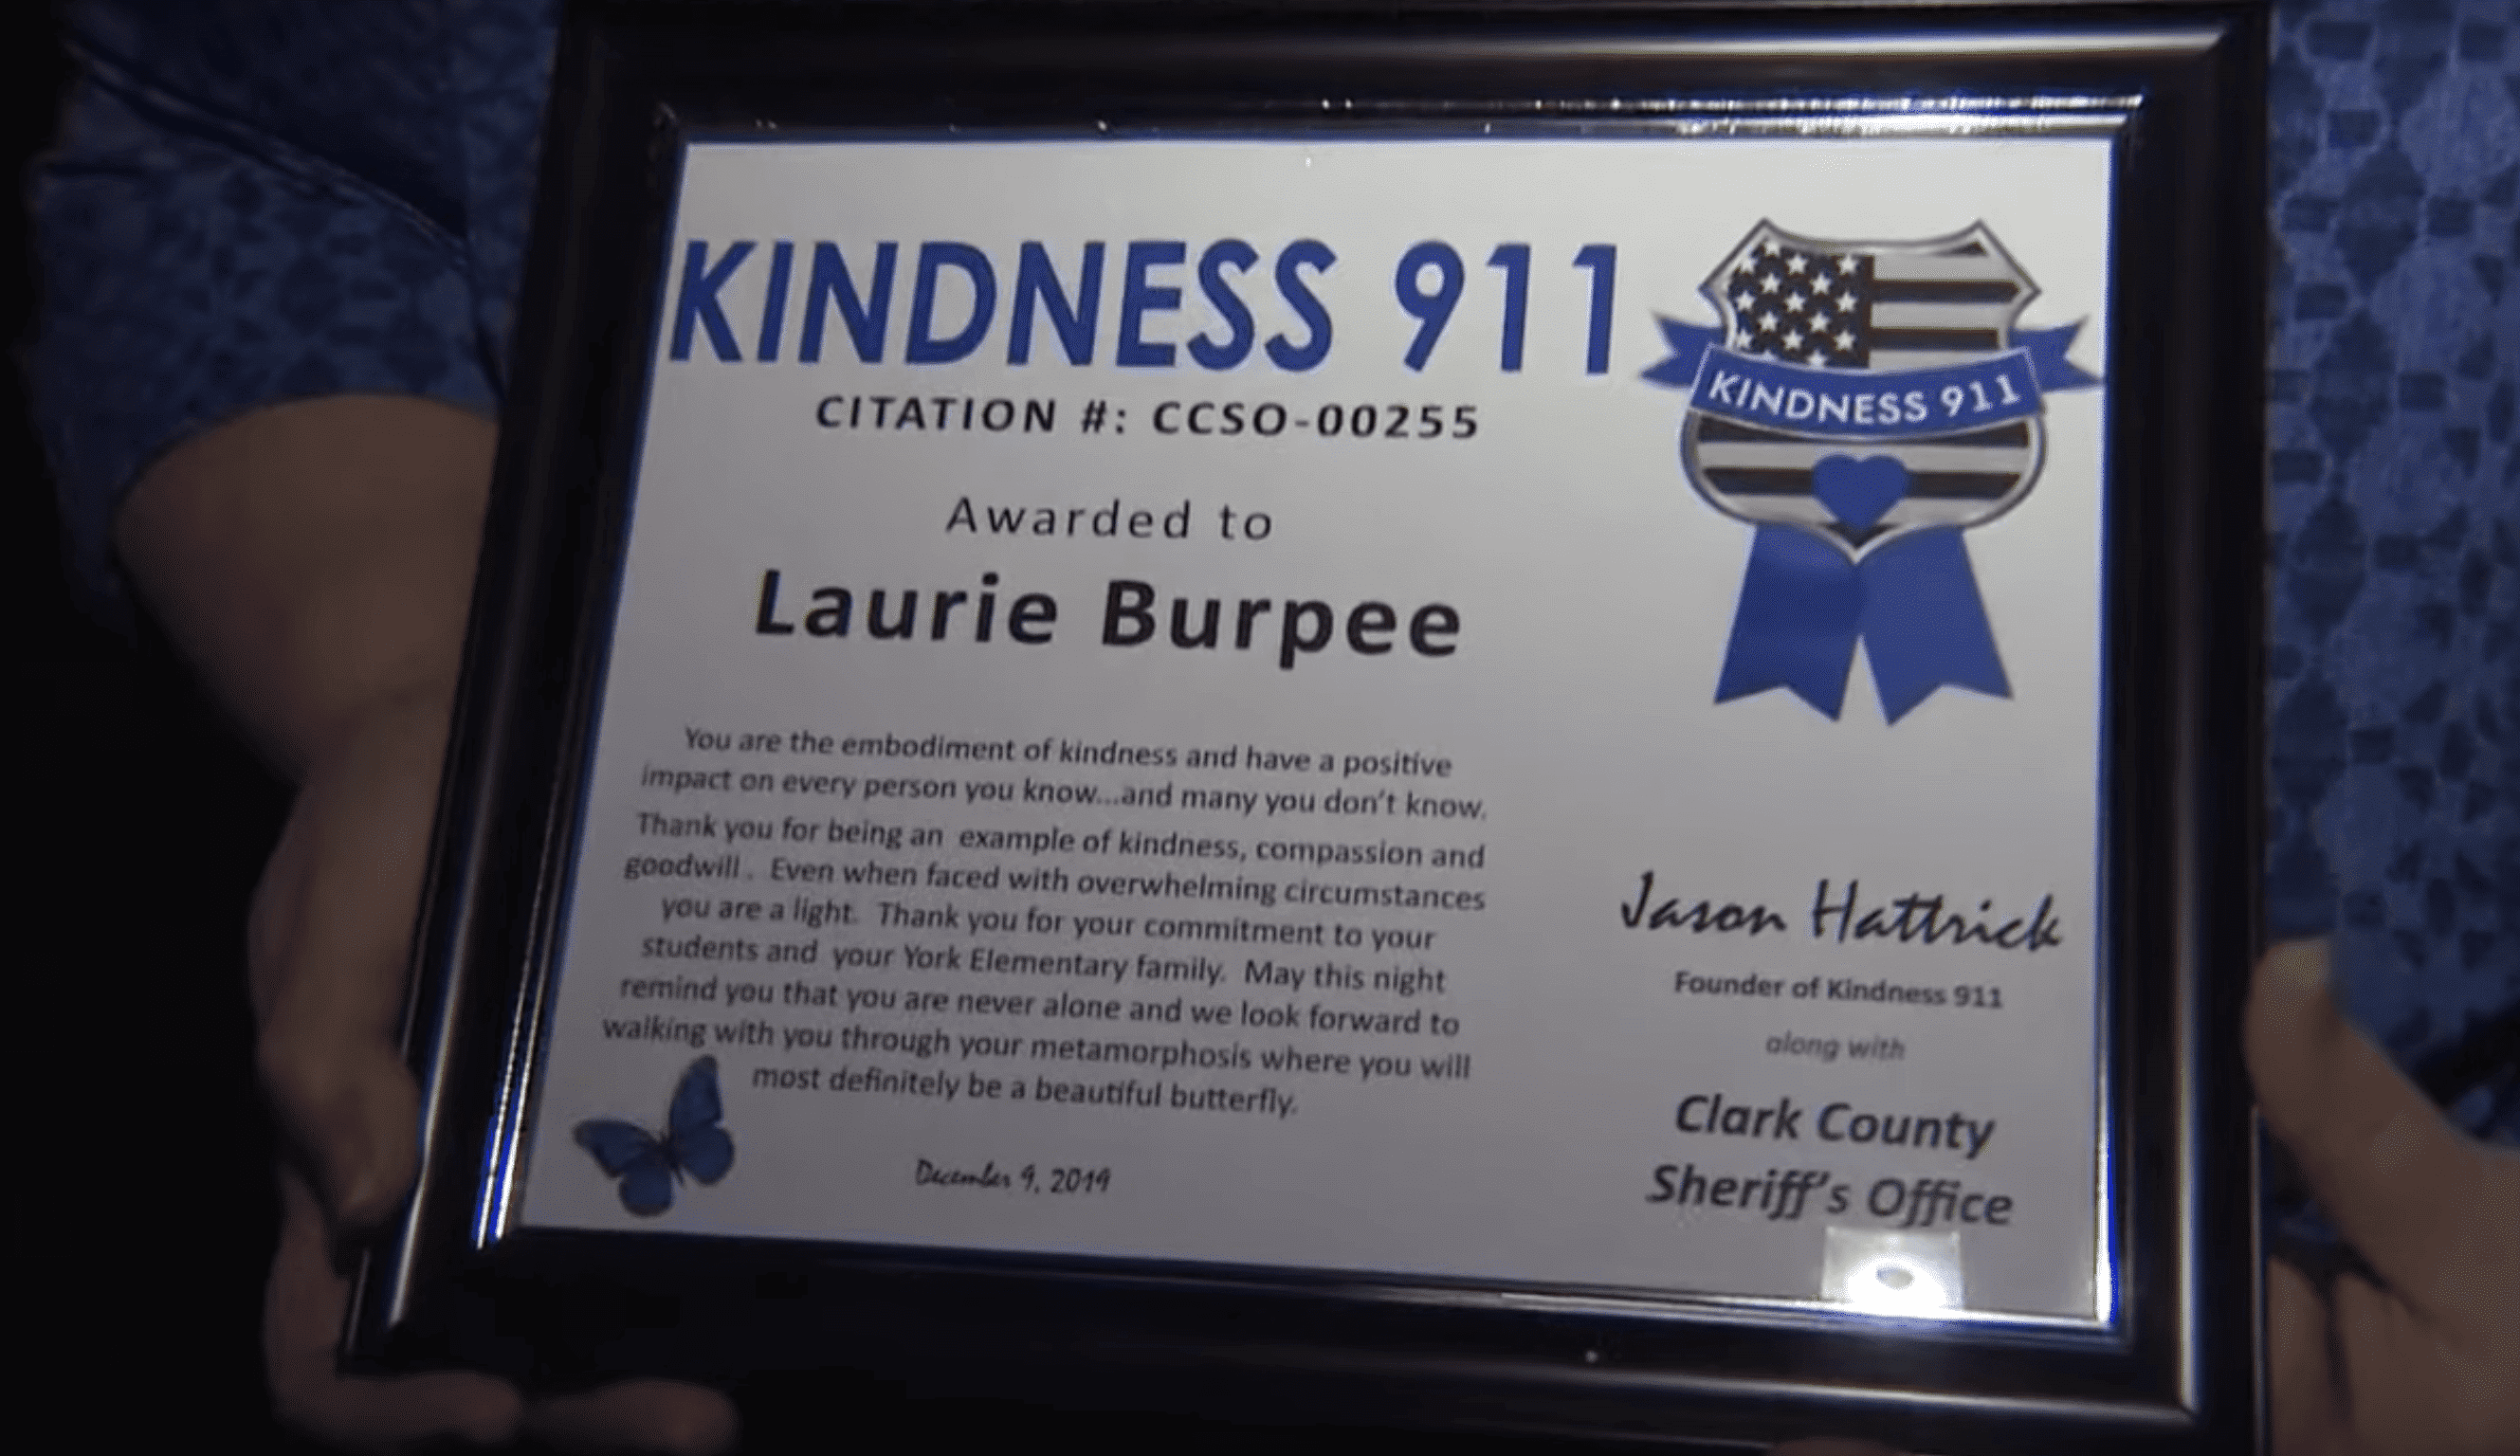 "Kindness 911"  kindness citation awarded to Laurie Burpee in Vancouver, Washington | Source: YouTube/KGWNews